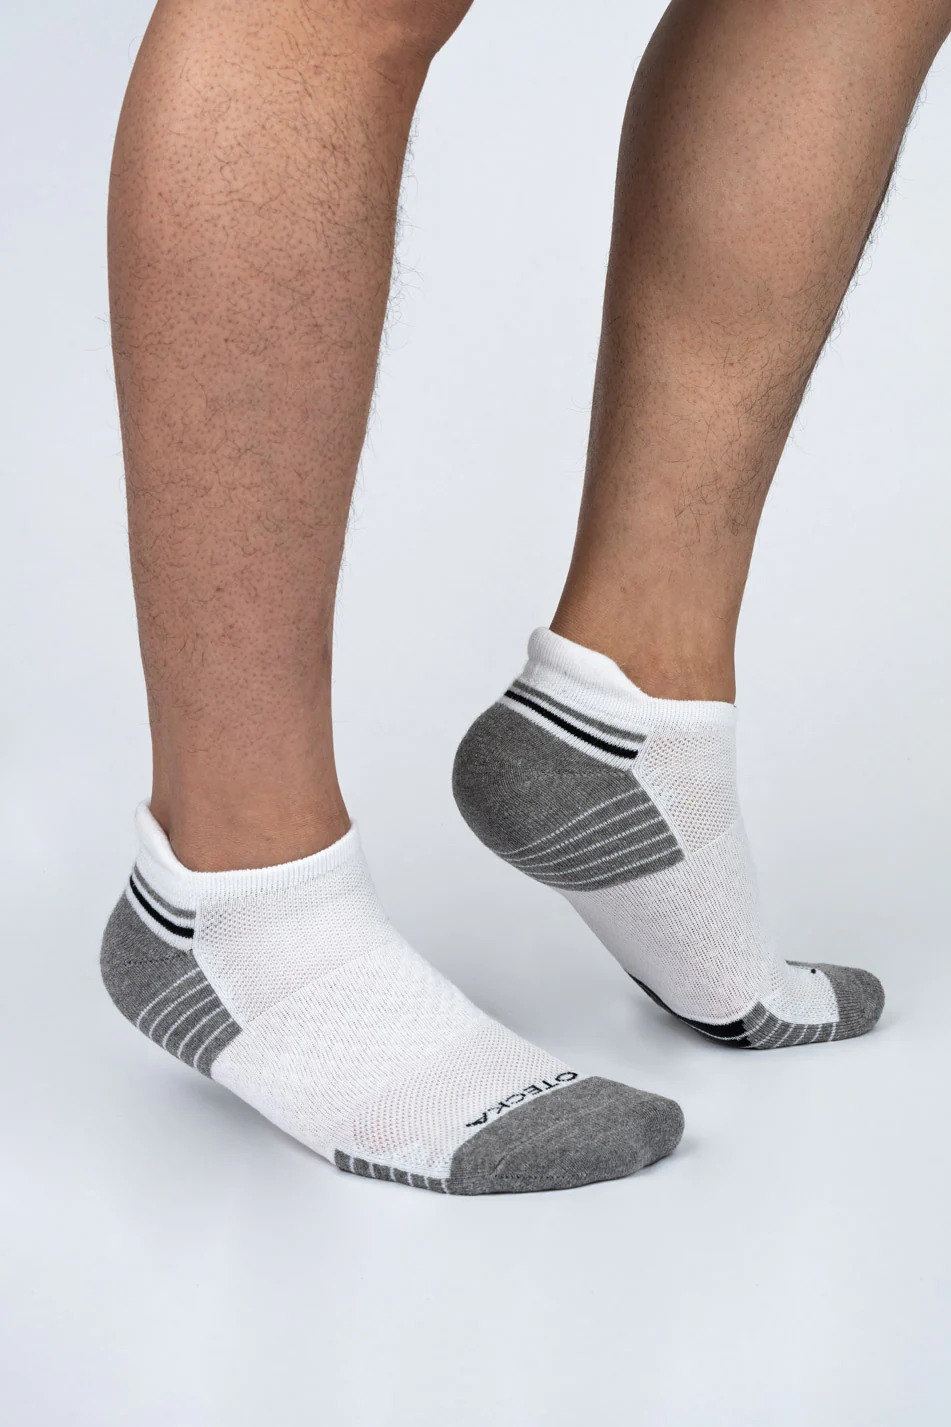 Stay Stylish and Comfortable with Otecka's Women's Ankle Socks in Canada